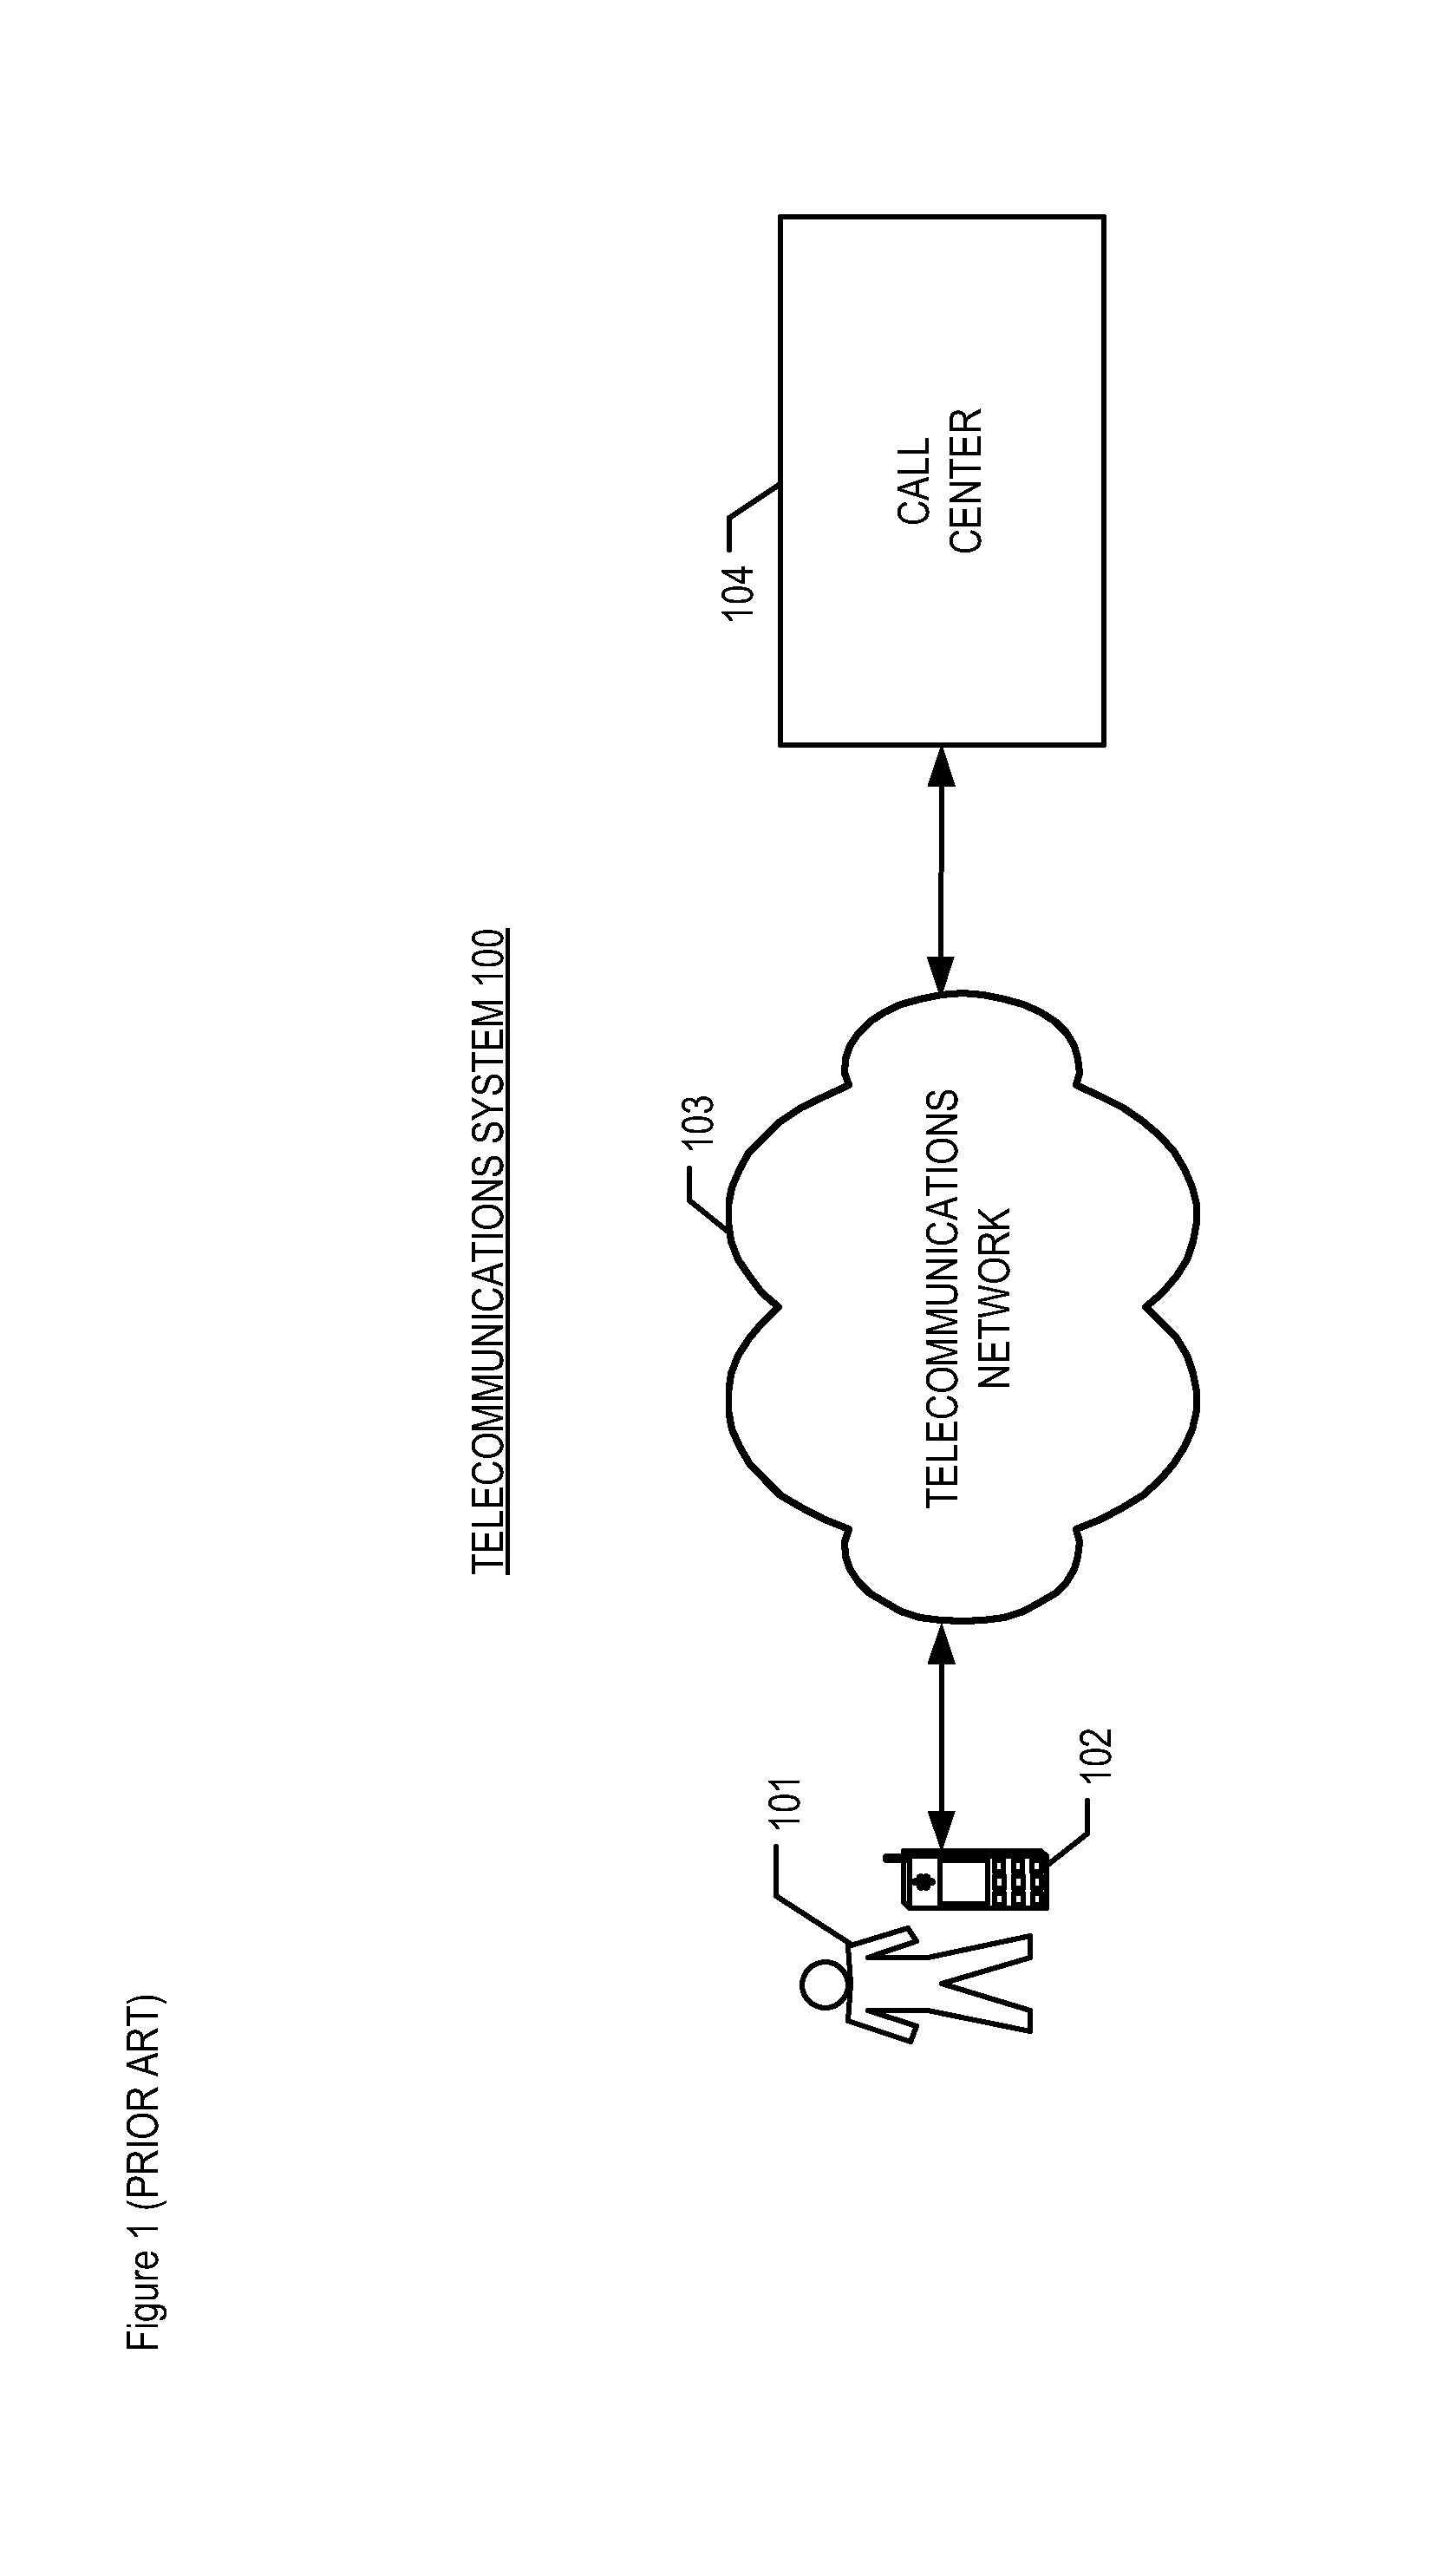 Interactive Voice Response System With Prioritized Call Monitoring